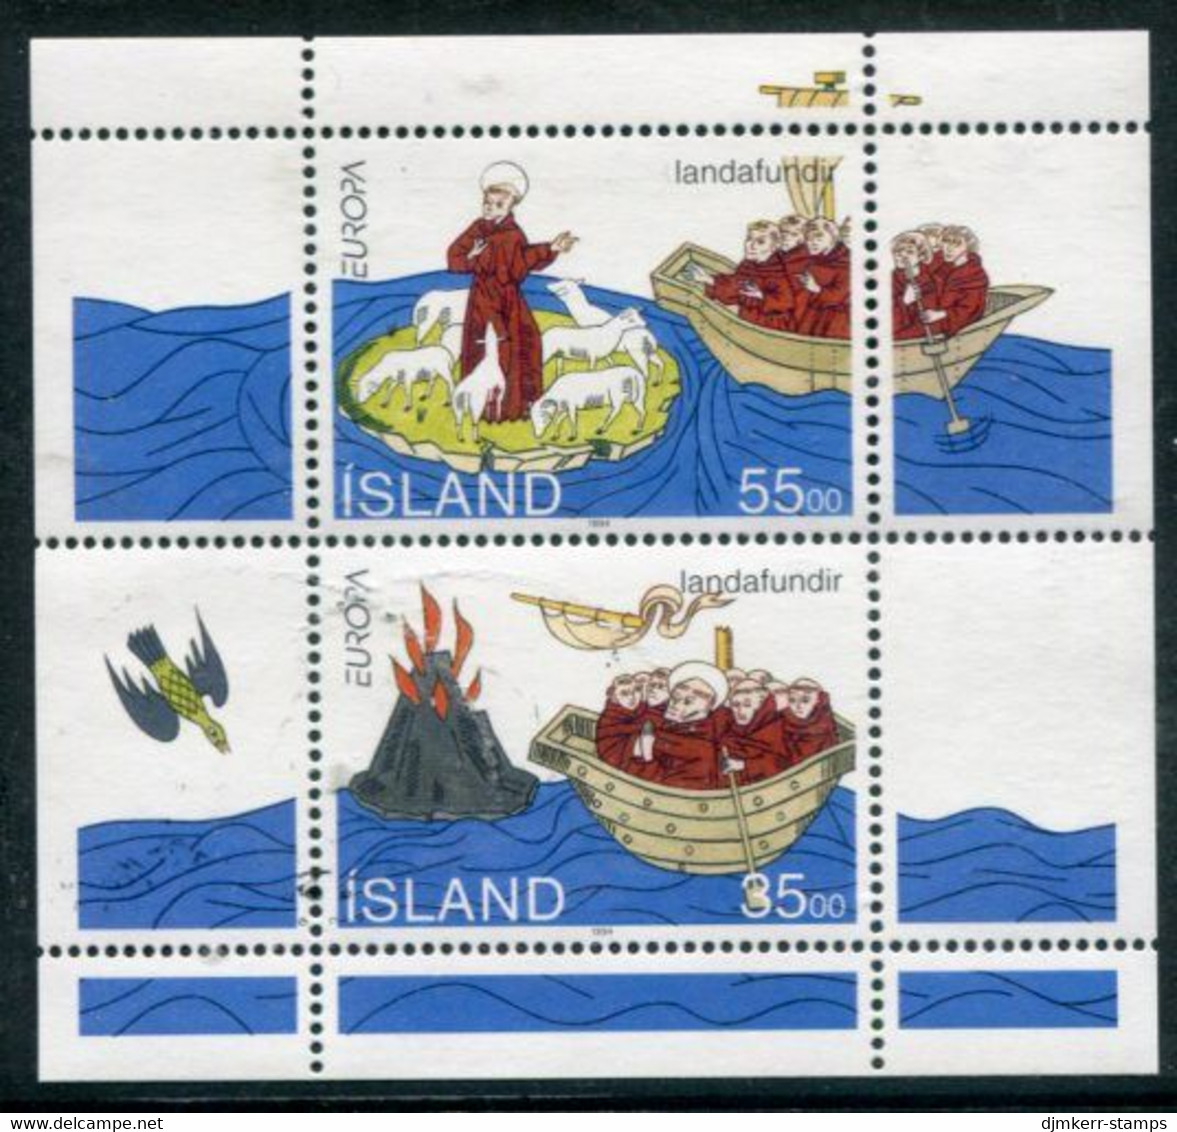 ICELAND 1994 Europa: Discover Of Iceland Block  MNH / **  Michel Block 15 - Nuevos